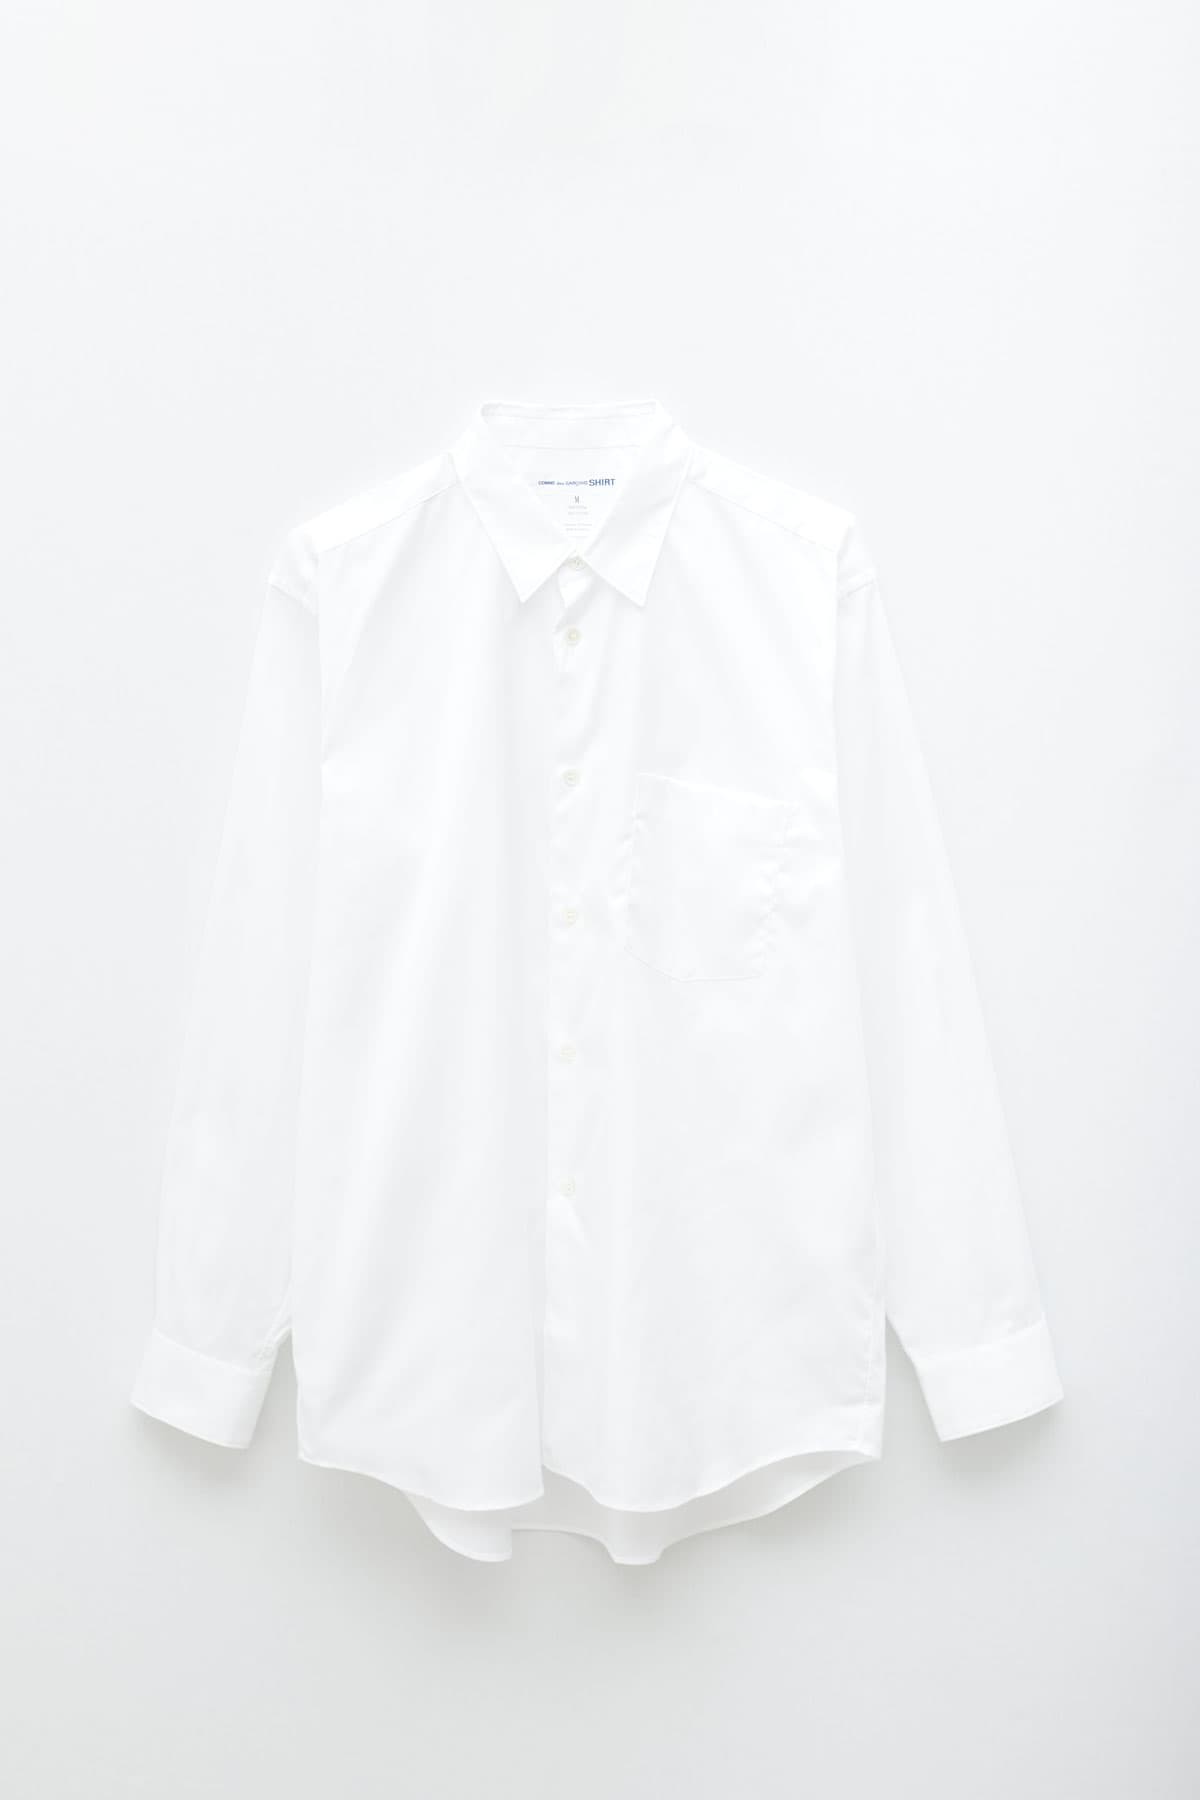 COMME DES GARCONS SHIRT FOREVER WHITE SHIRT IAMNUE